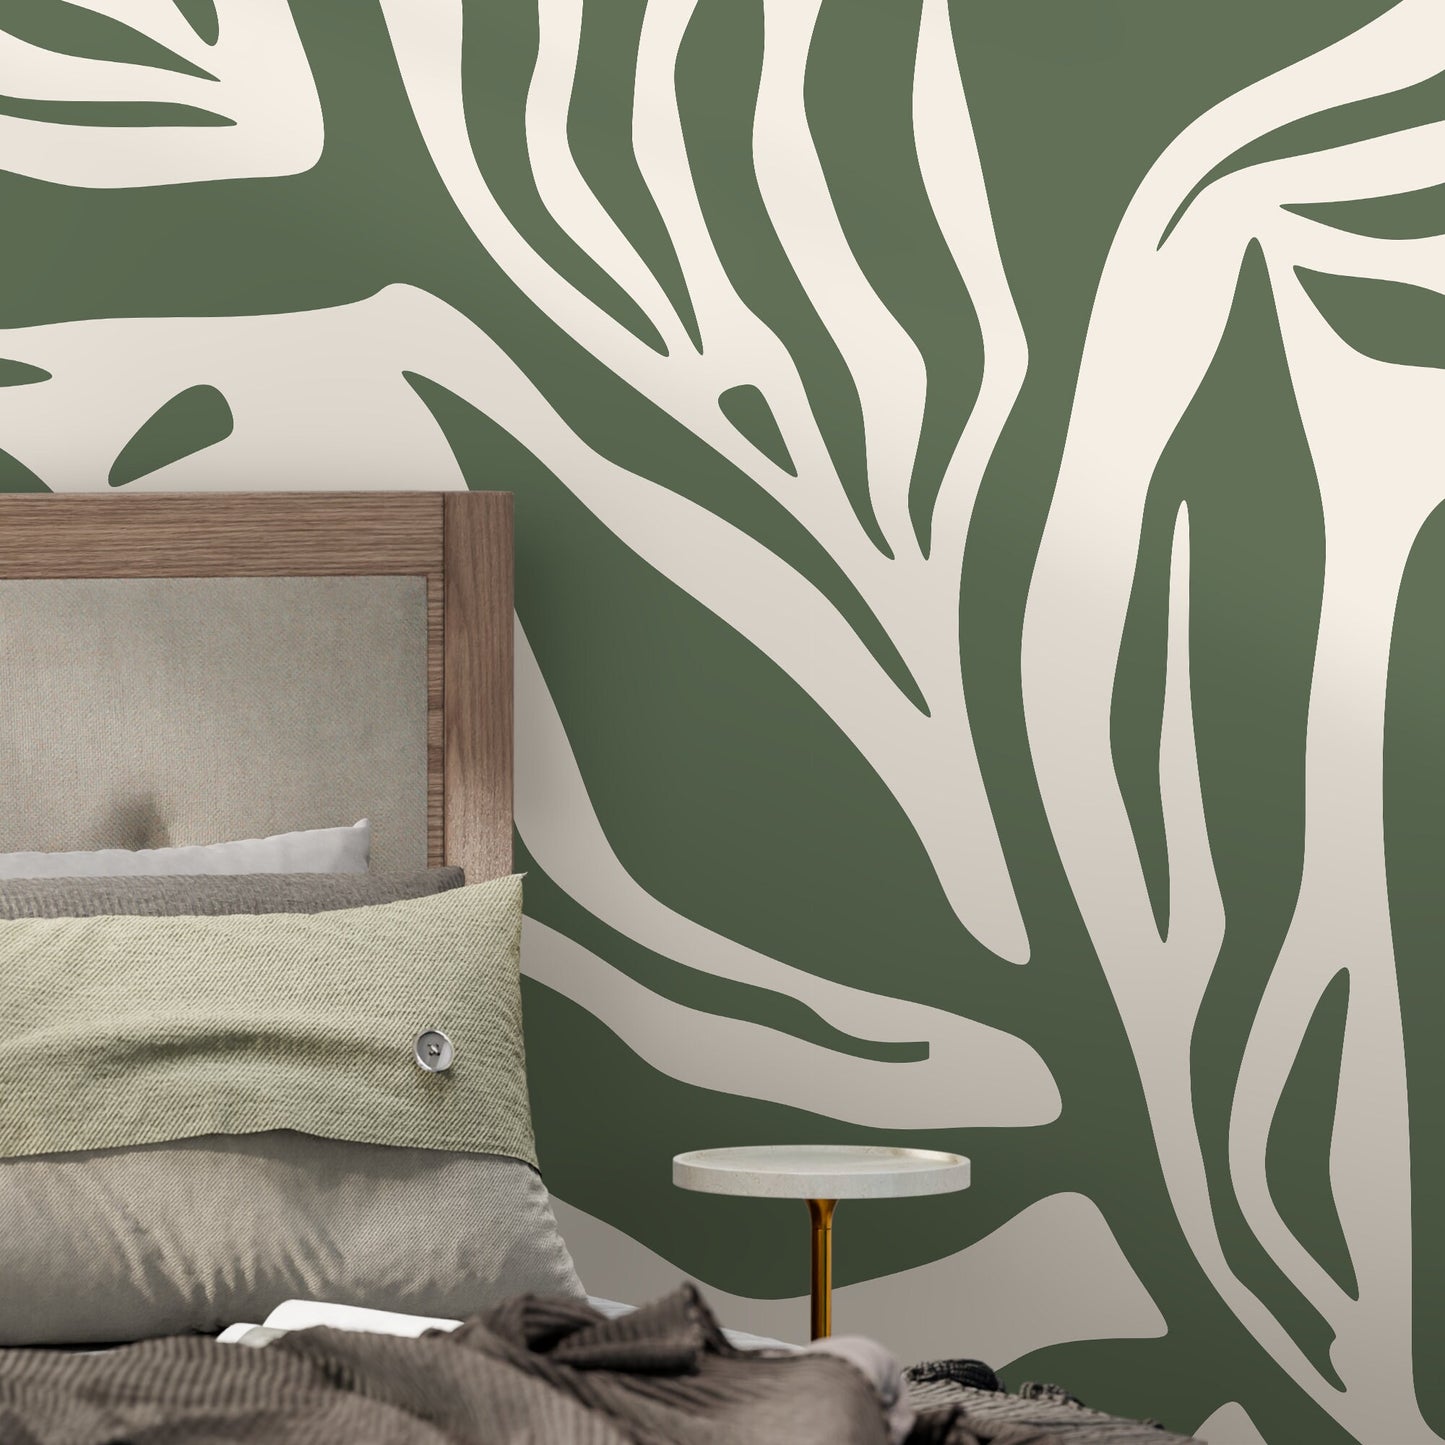 Olive Green Abstract Art Wallpaper Large Boho Wallpaper Peel and Stick and Traditional Wallpaper - D628